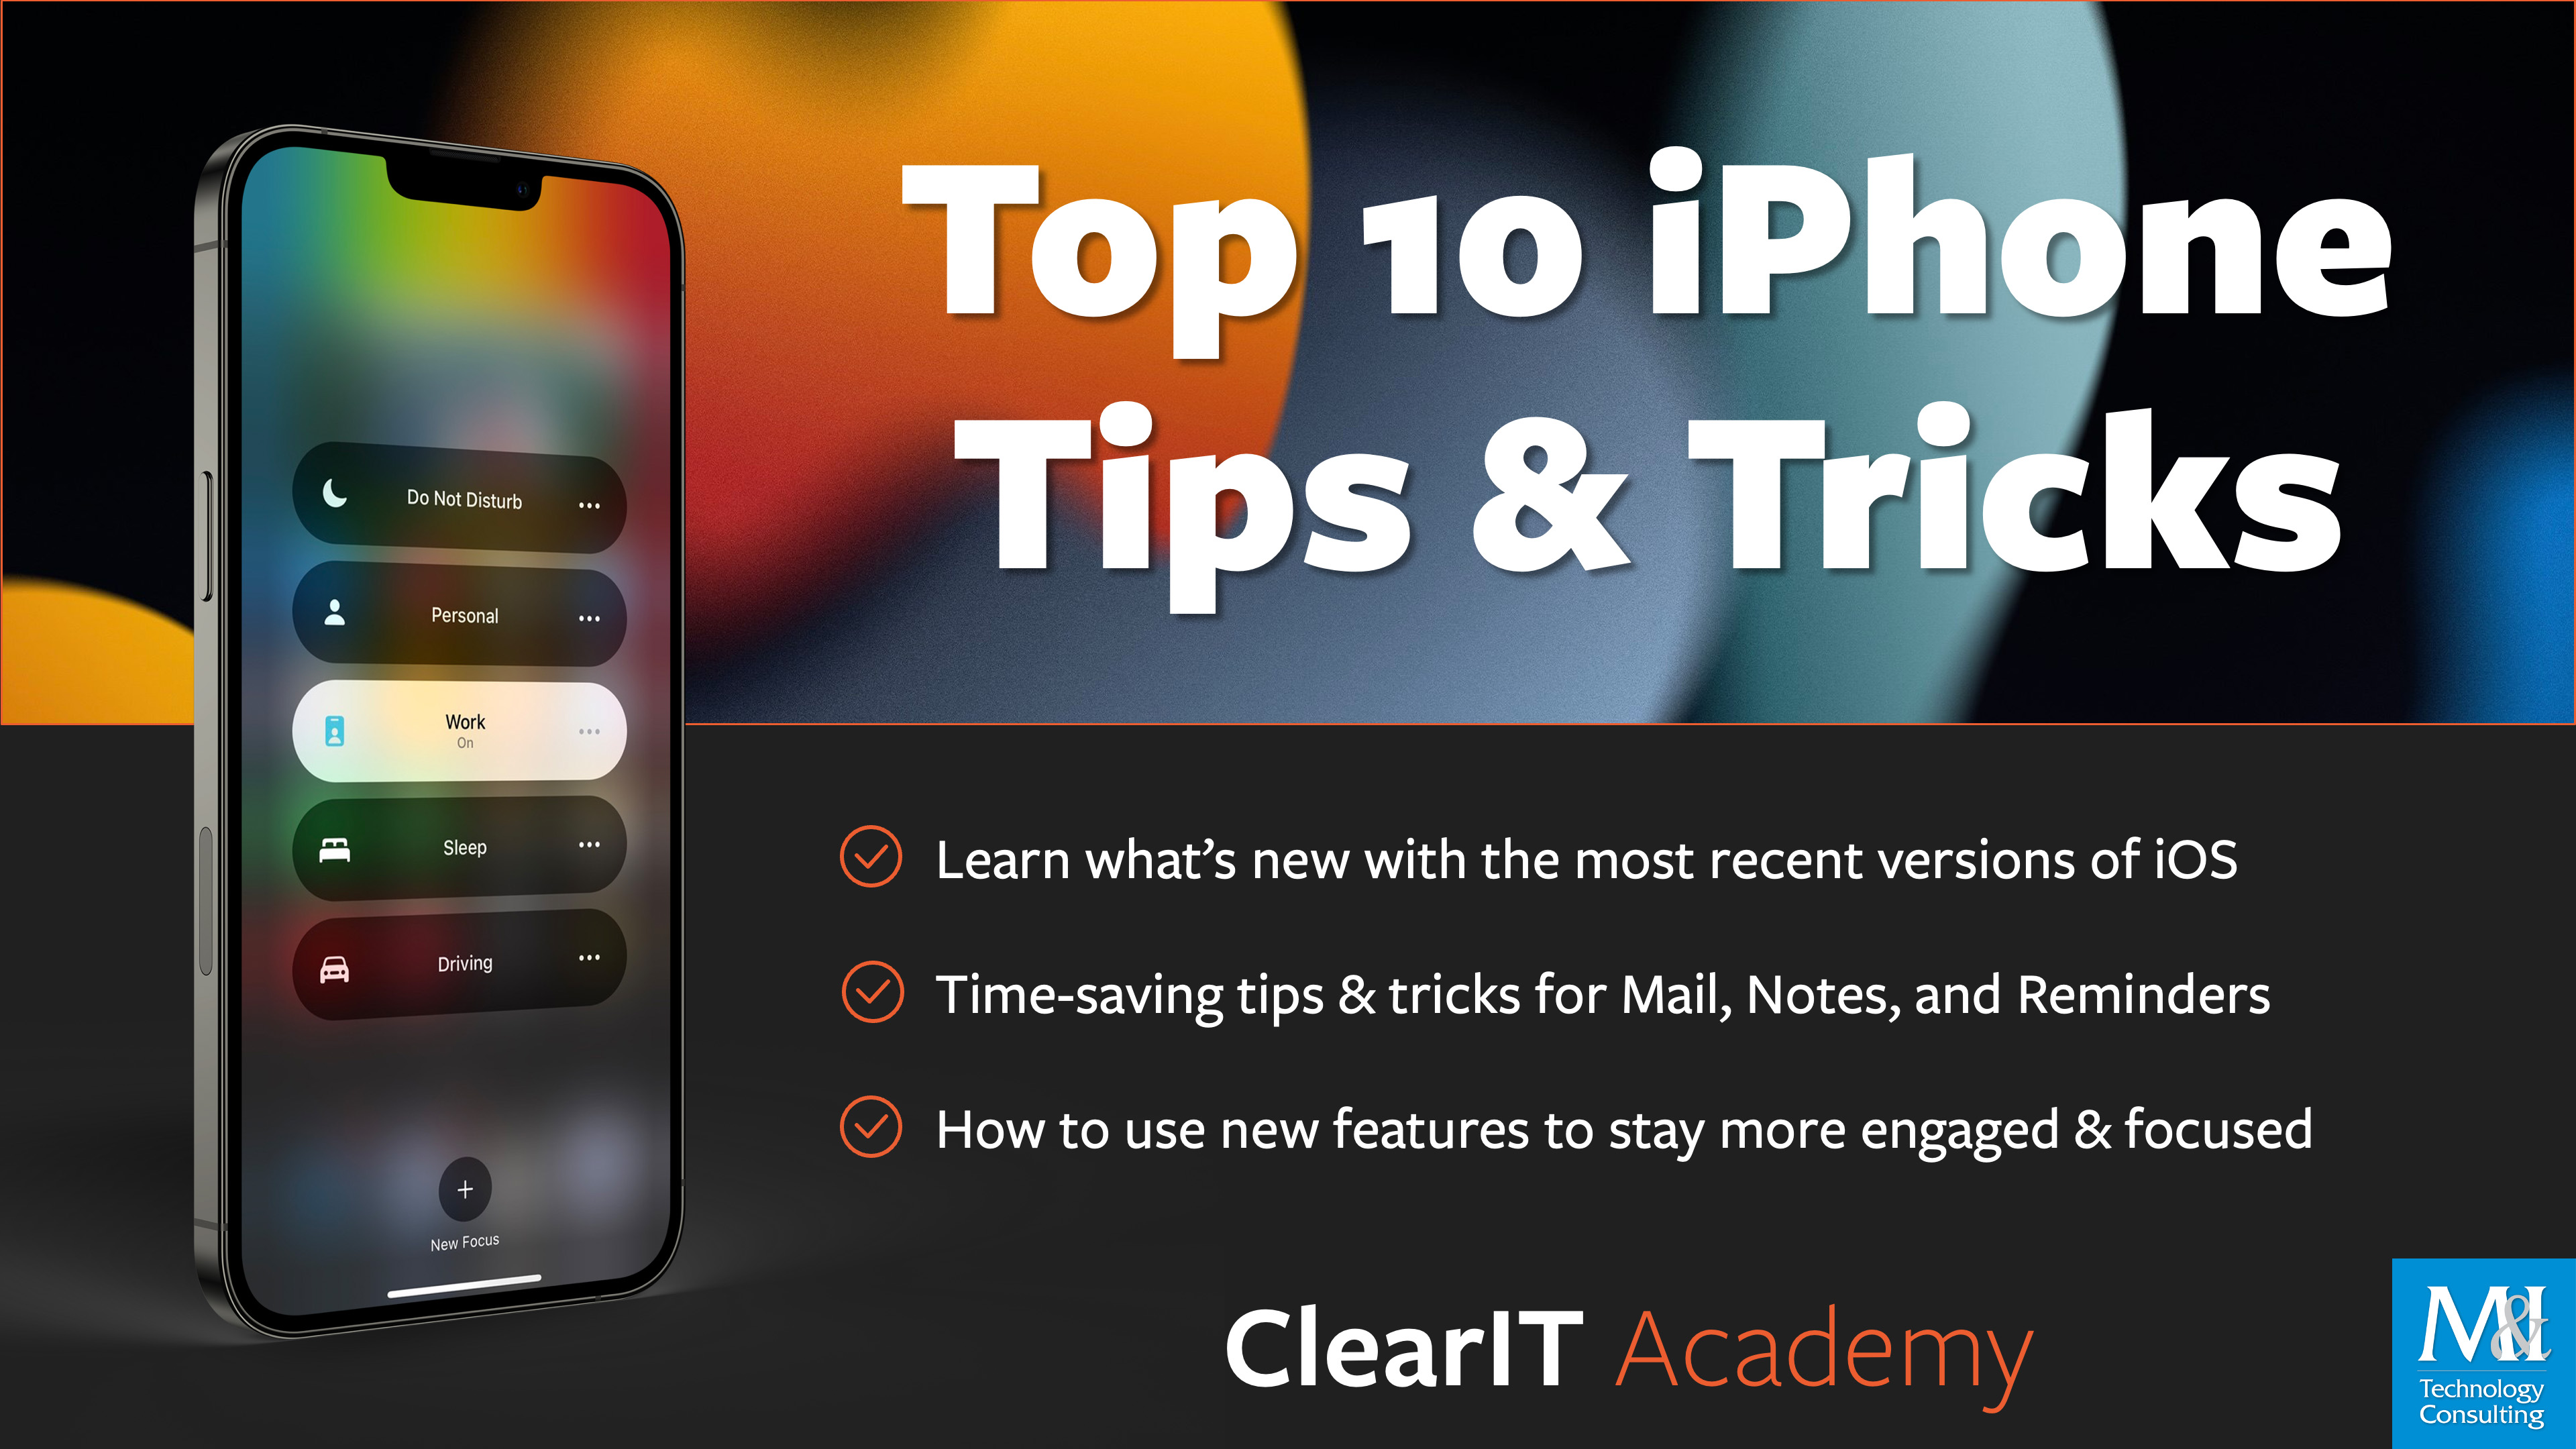 Hus Countryside lektie Top 10 iPhone Tips and Tricks - ClearIT Academy On Demand